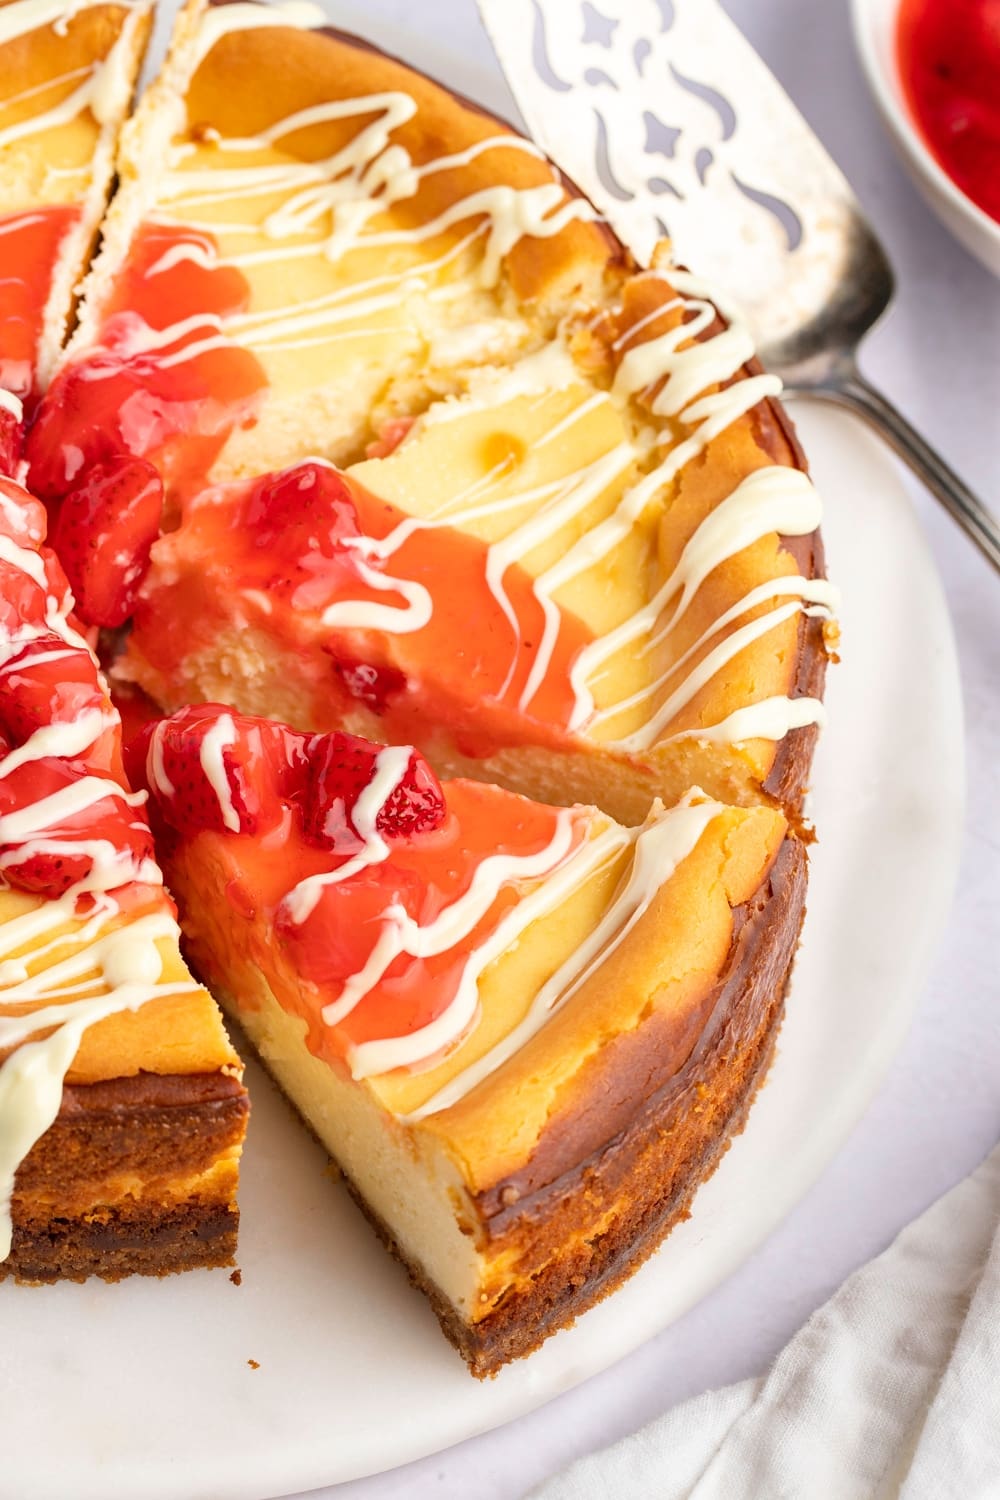 Sliced Whole White Chocolate Cheesecake with Strawberry Sauce Drizzled With White Syrup